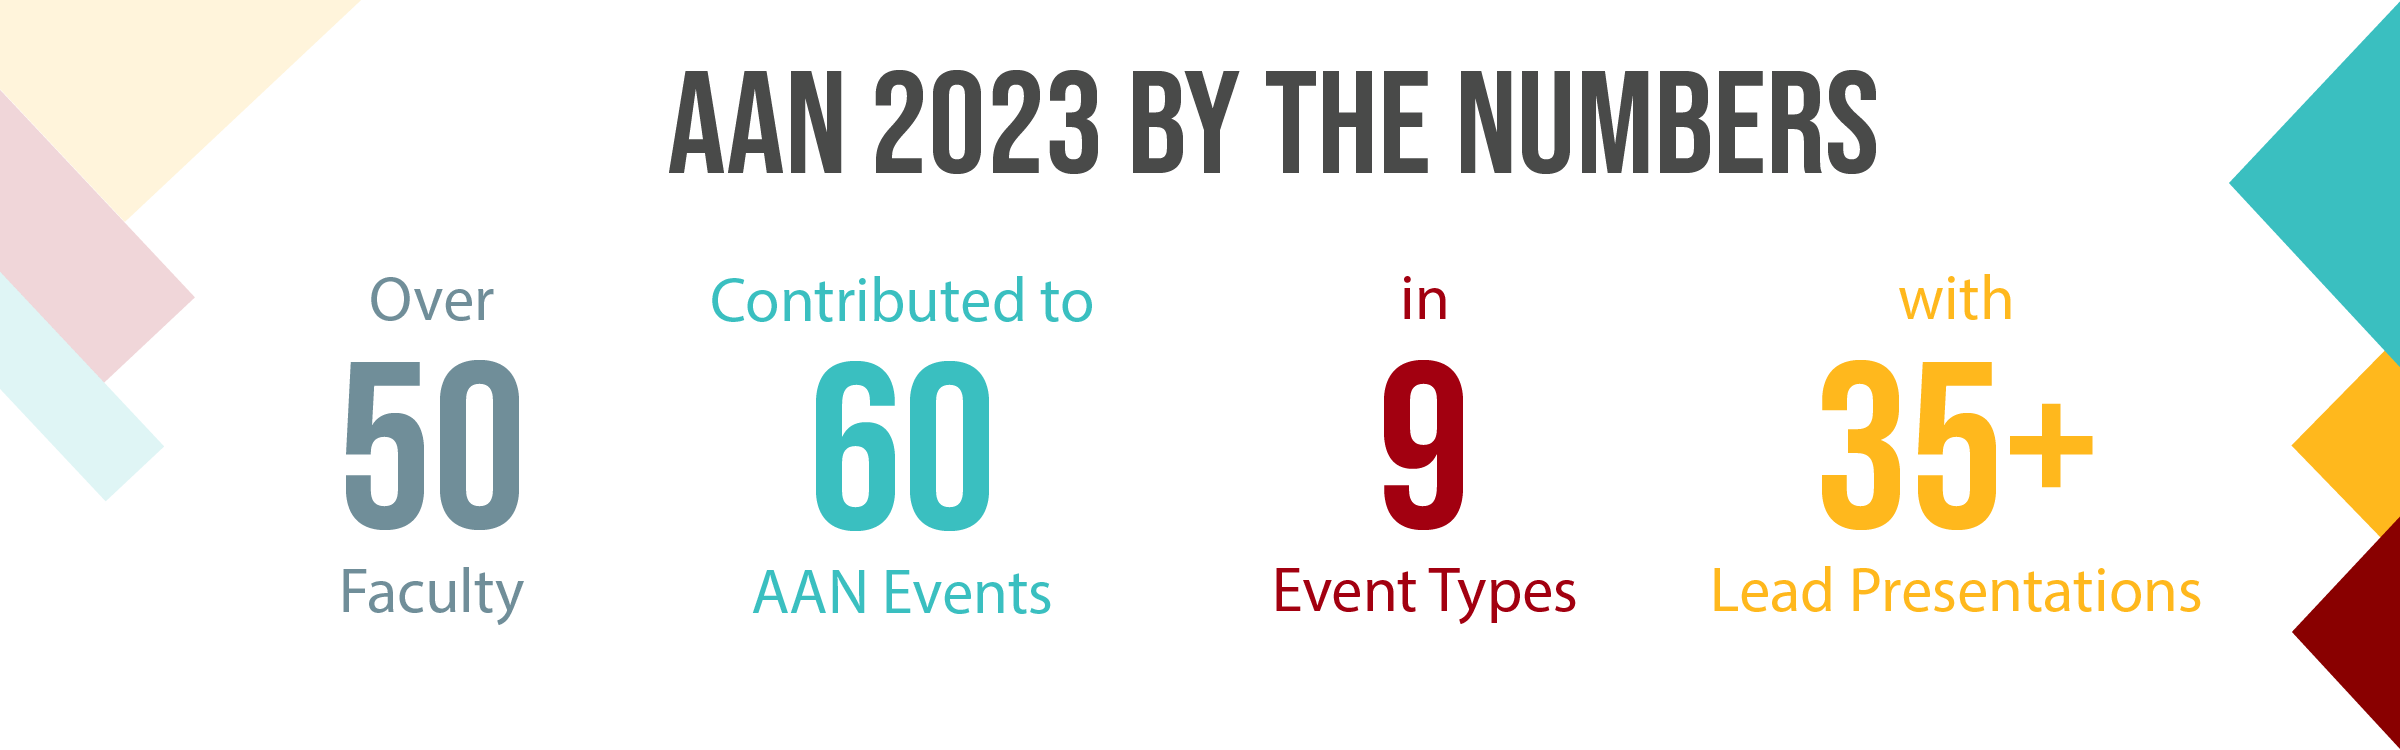 AAN 2023 By the Numbers